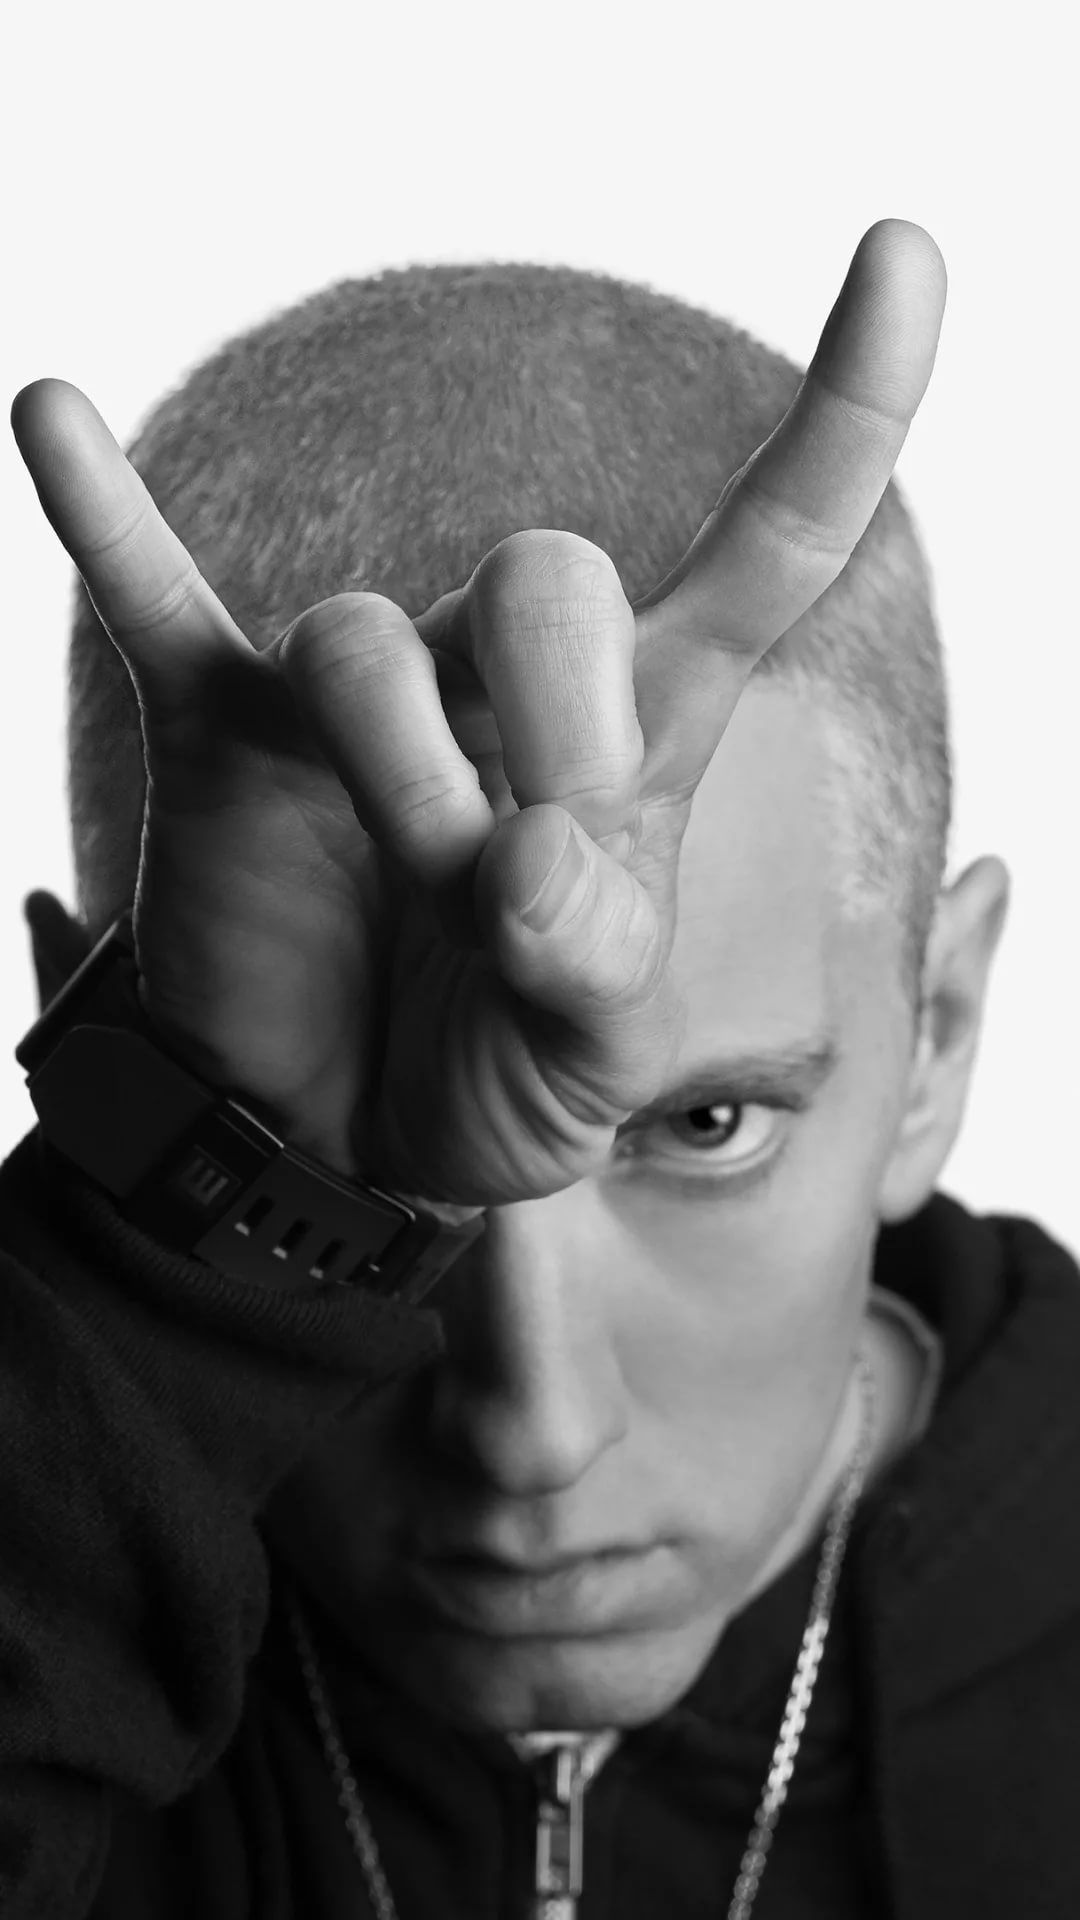 Eminem cool wallpapers for iPhone 6